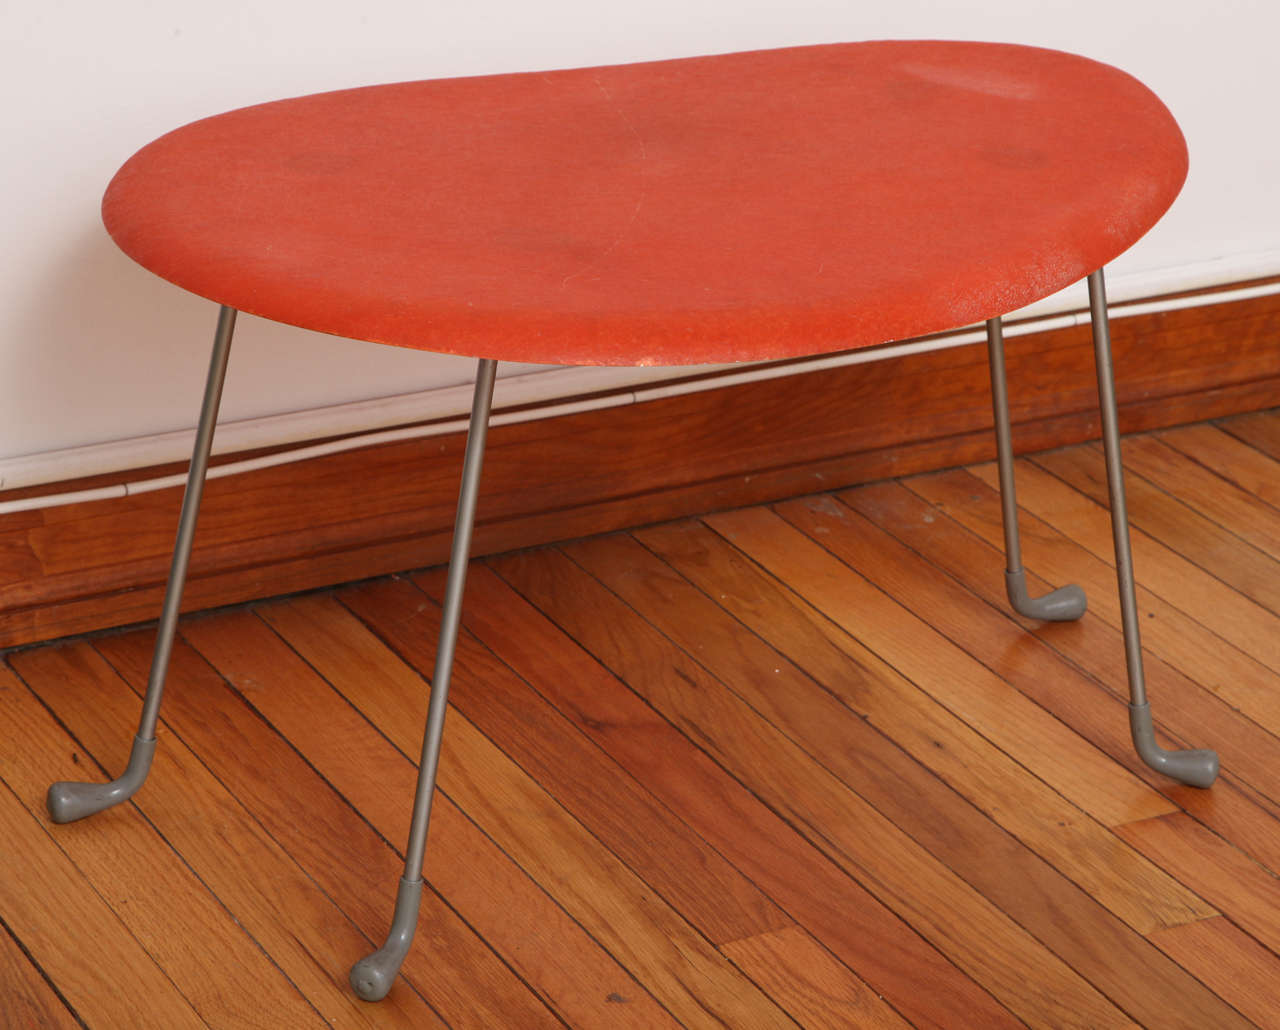 Collapsible French modernist table designed by Jean-Pierre Boutillier for Axis, Paris circa 1980s.